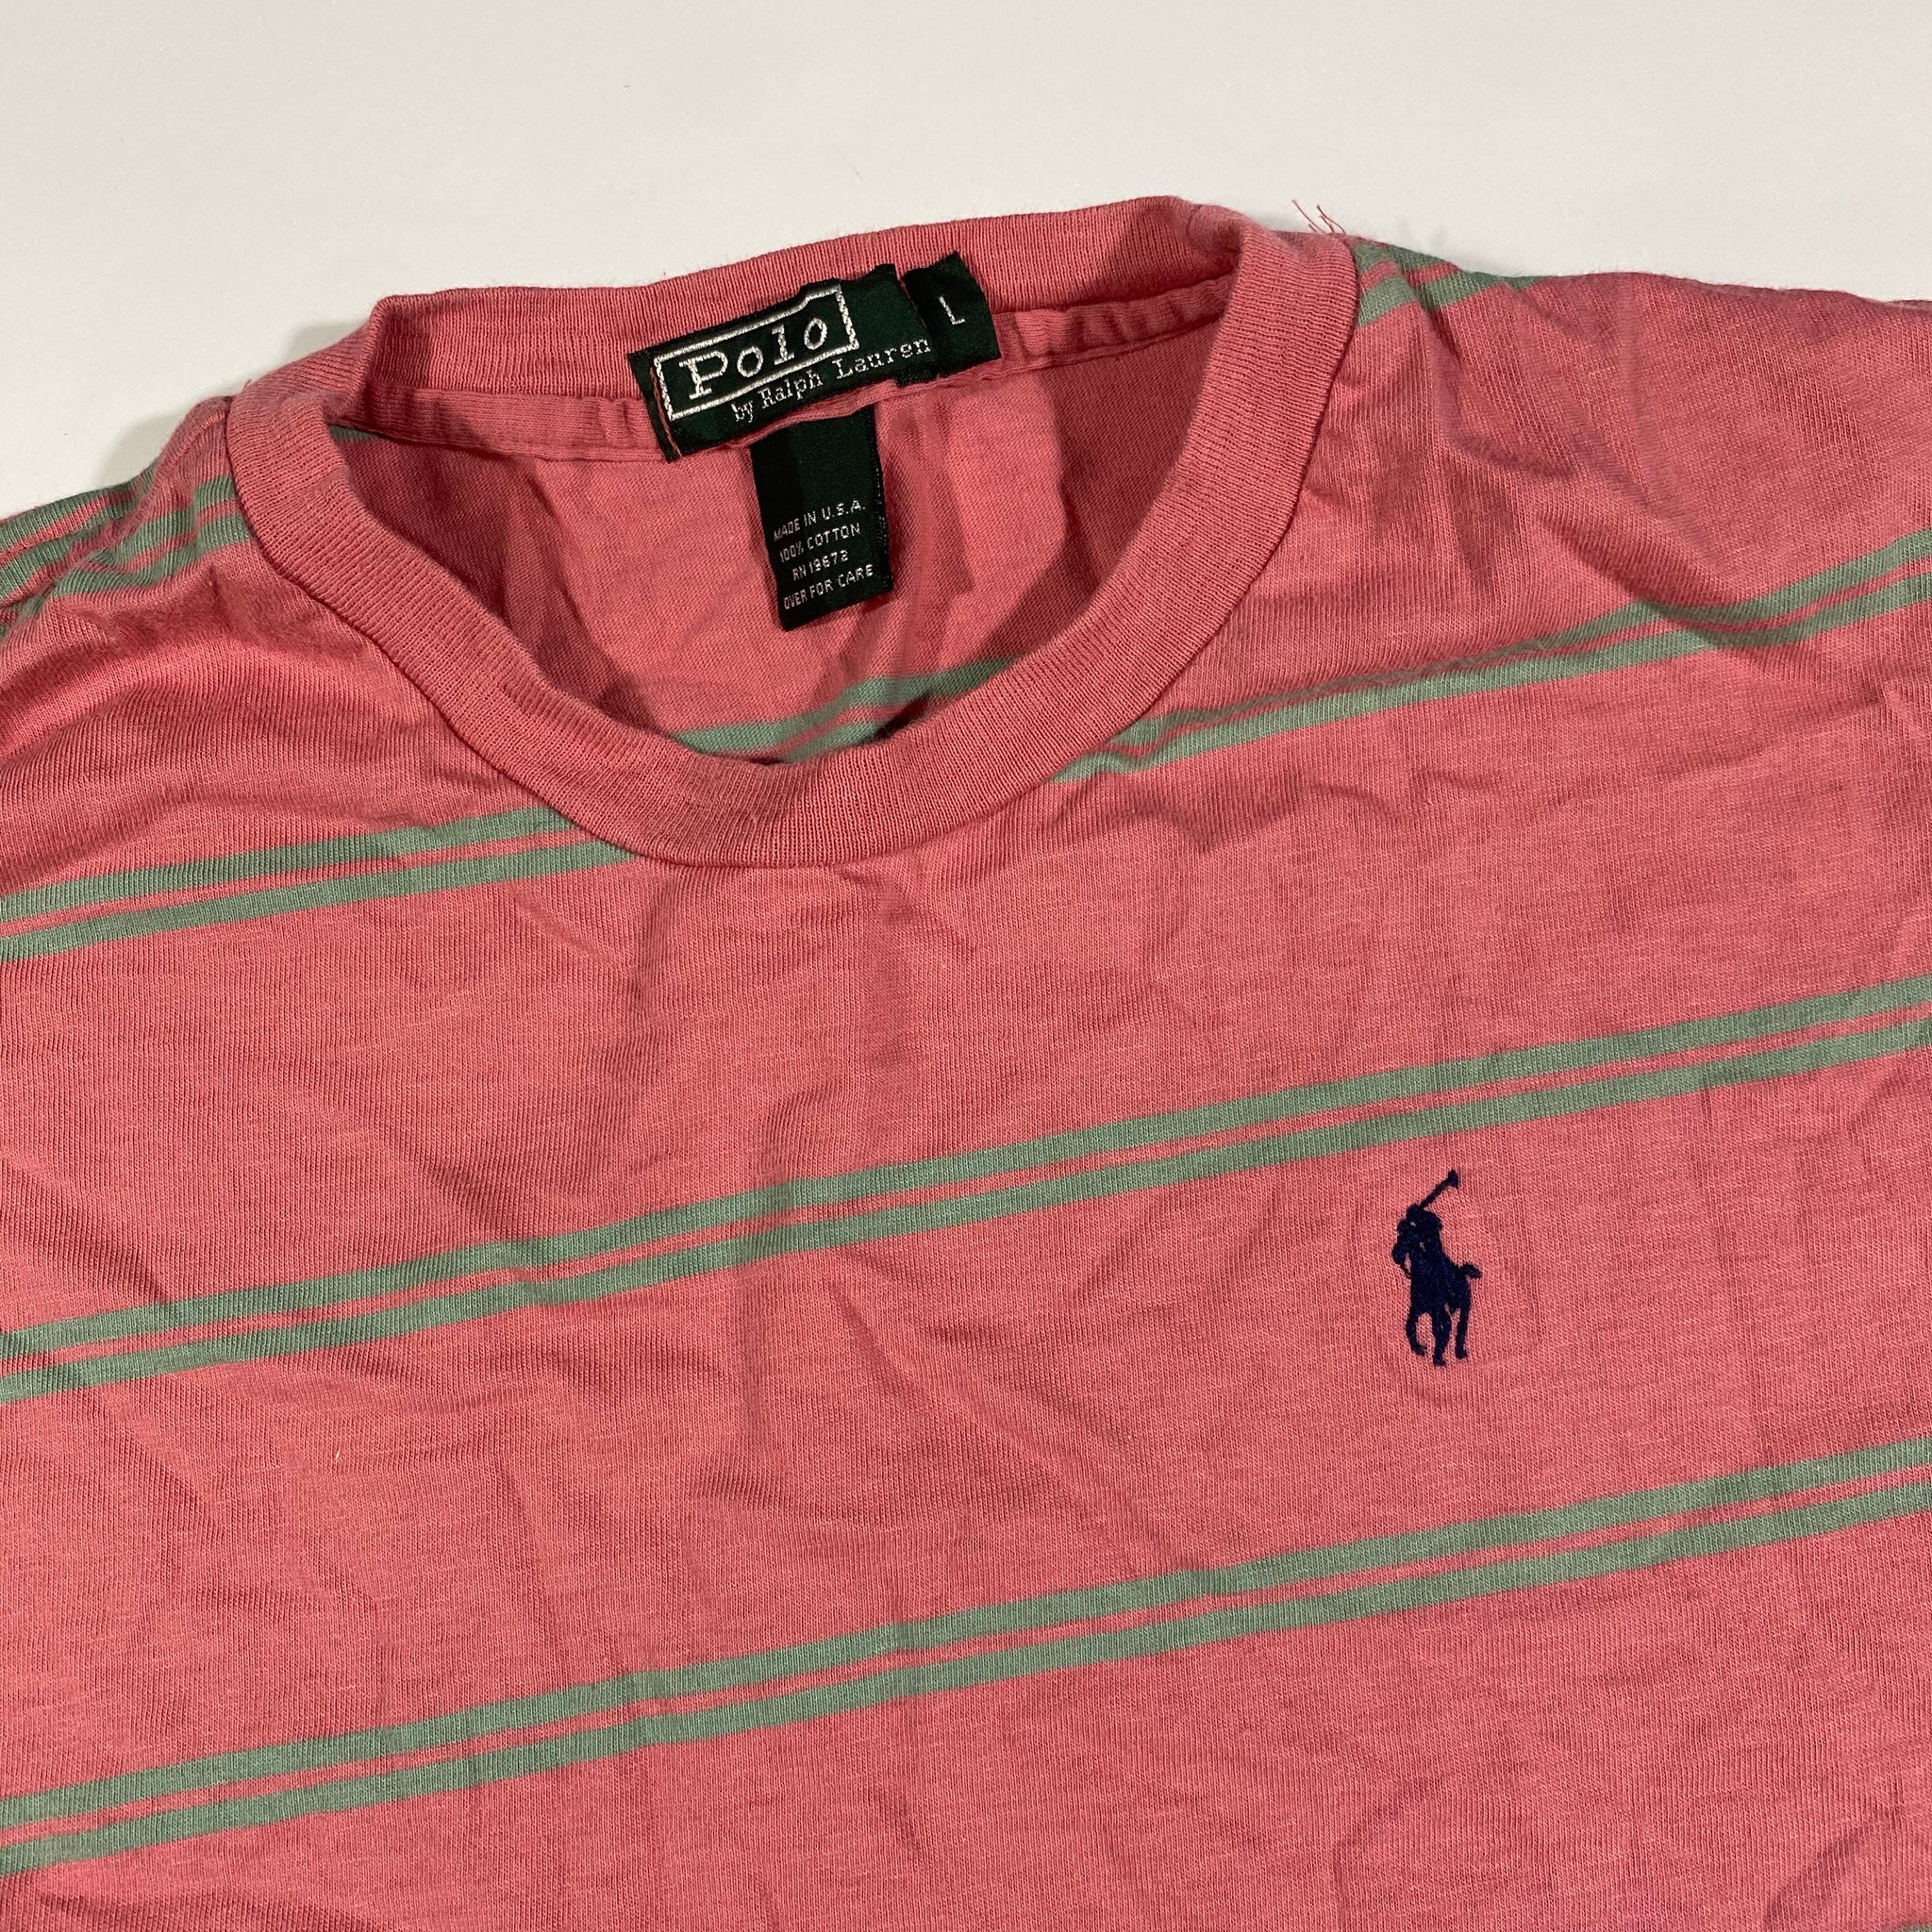 80s Polo ralph lauren striped tee pack. Womens or boys large. Men’s small fit